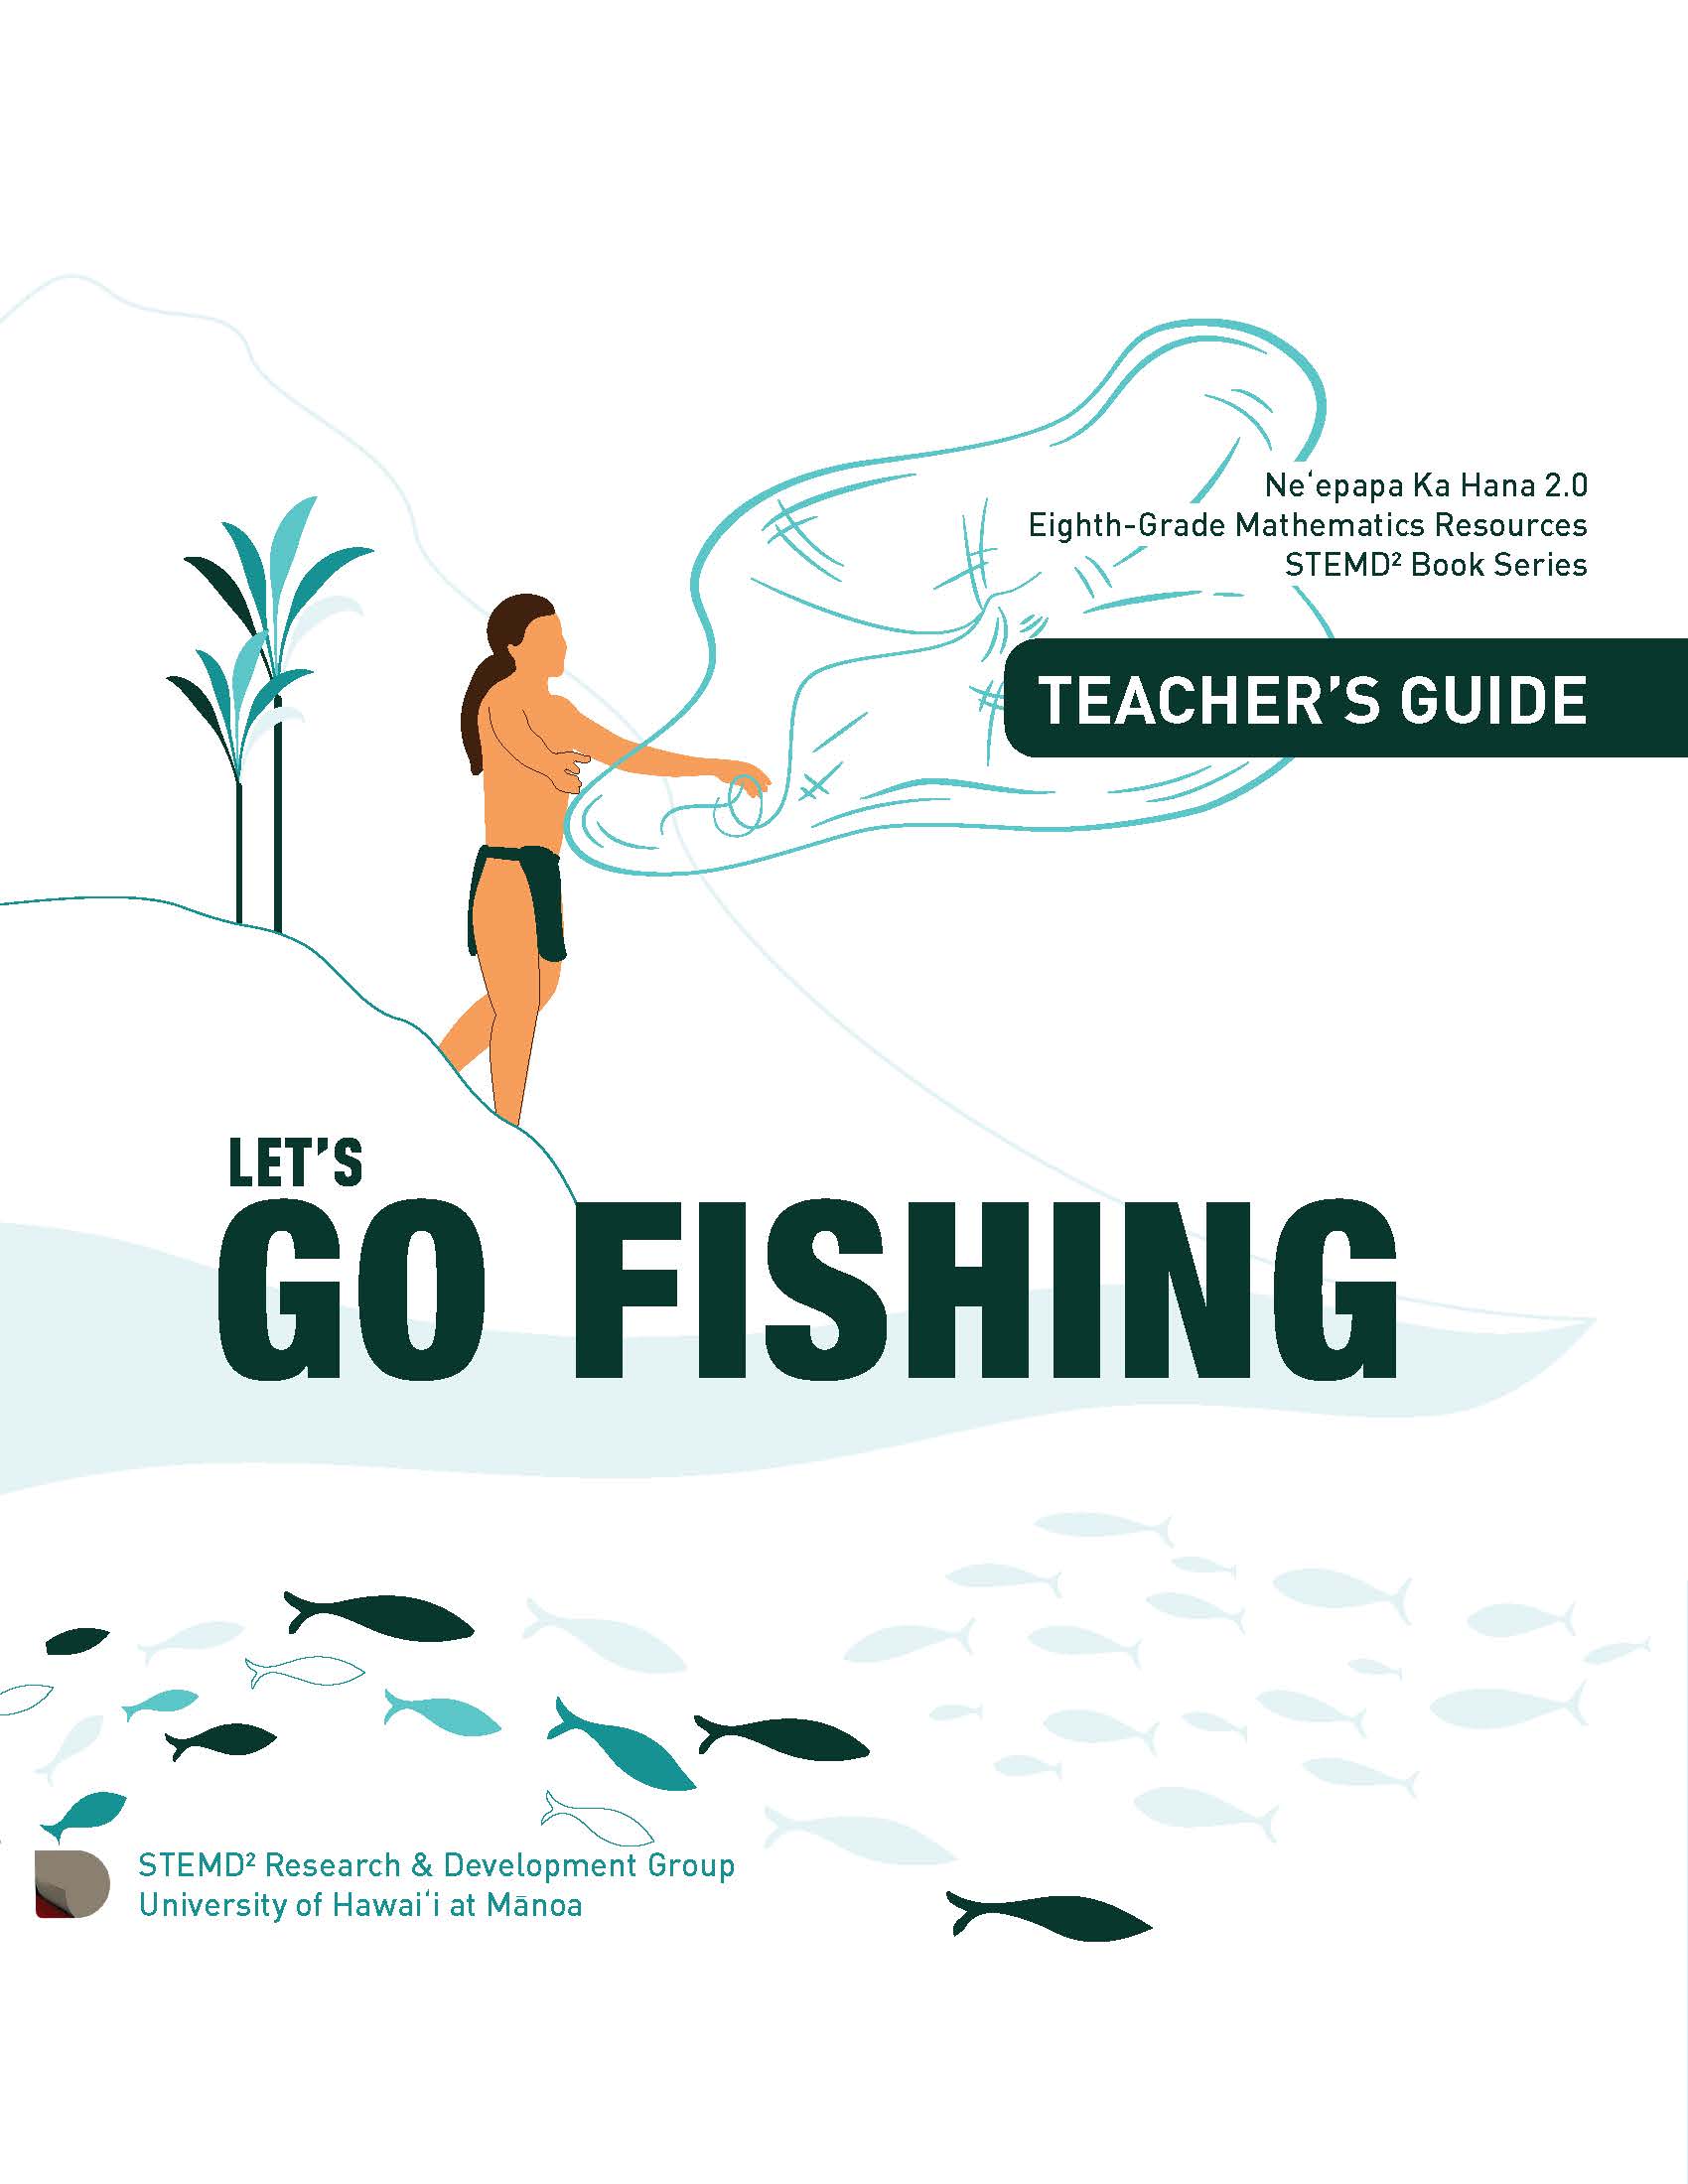 the cover of the 8th grade let's go fishing teacher book.